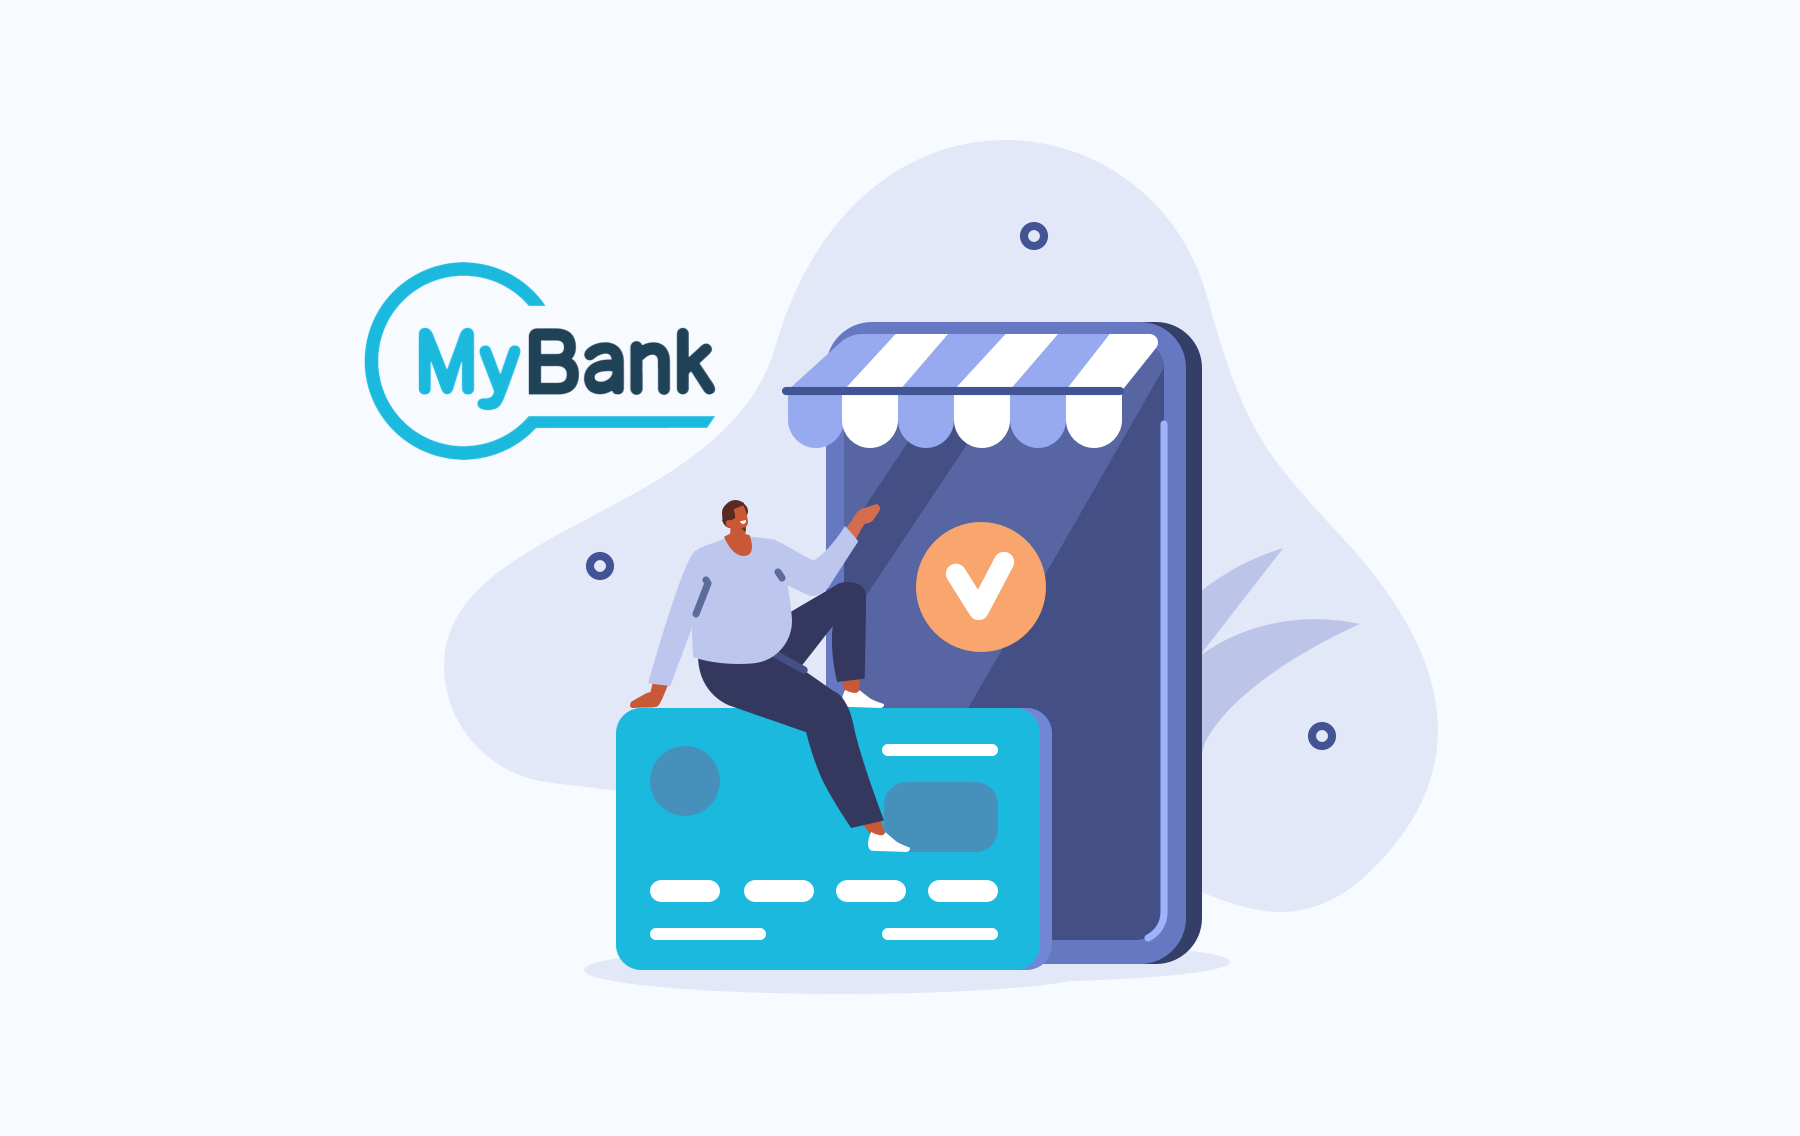 MyBank payment method is activated for Italy